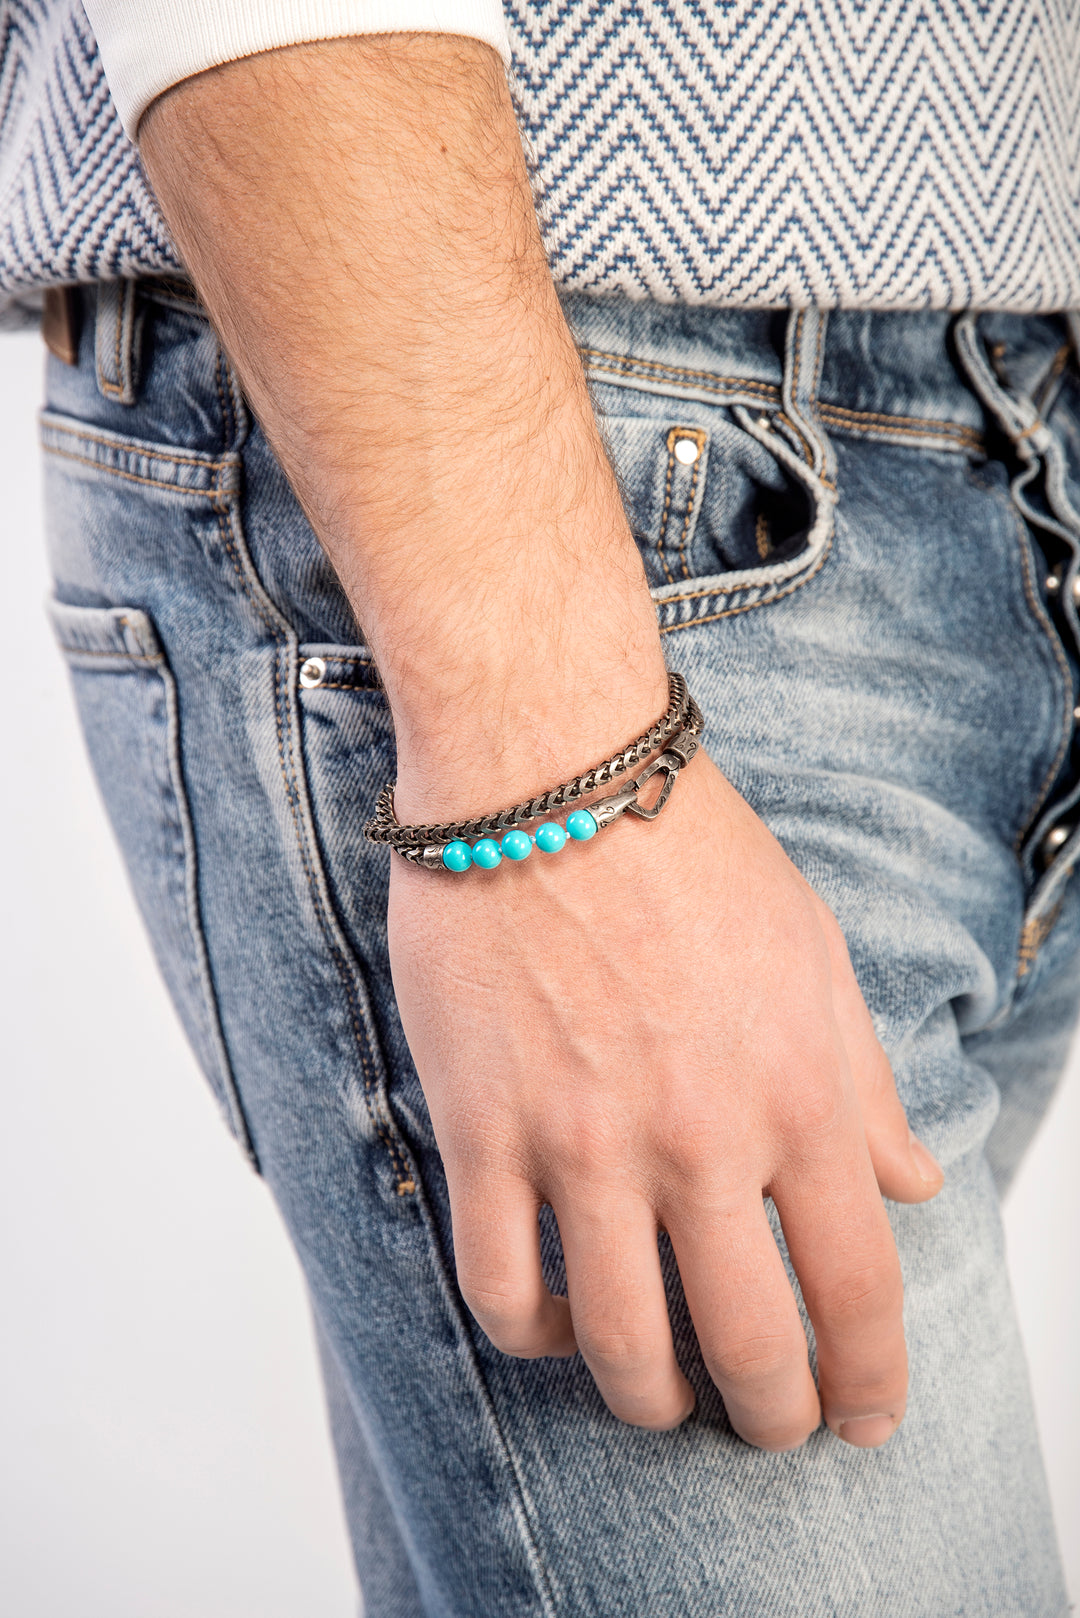 ULYSSES Turquoise Beads Double Chain Bracelet